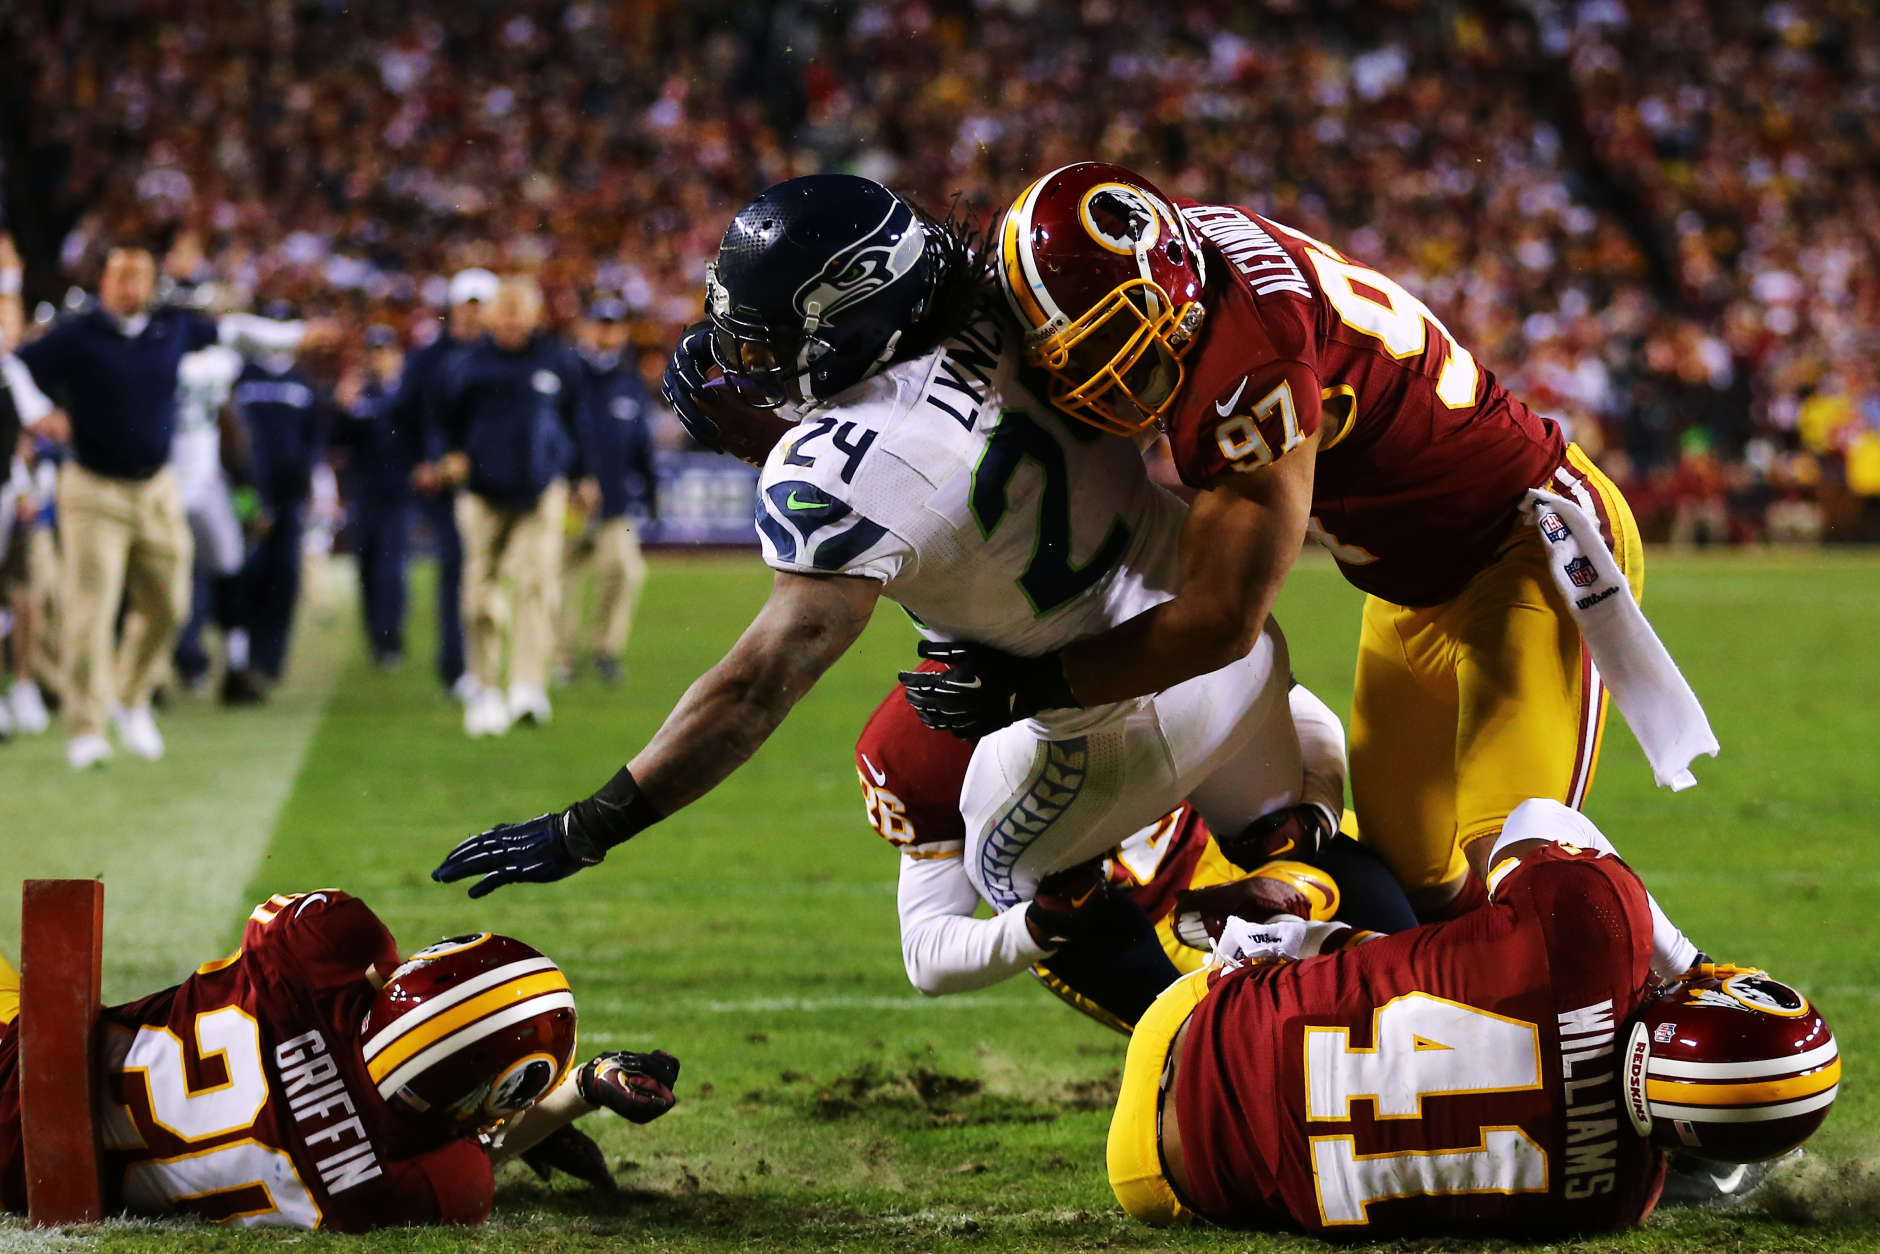 LANDOVER, MD - JANUARY 06:  Marshawn Lynch #24 of the Seattle Seahawks scores a fourth quarter touchdown against the defense of  Lorenzo Alexander #97 of the Washington Redskins during the NFC Wild Card Playoff Game at FedExField on January 6, 2013 in Landover, Maryland.  (Photo by Al Bello/Getty Images)